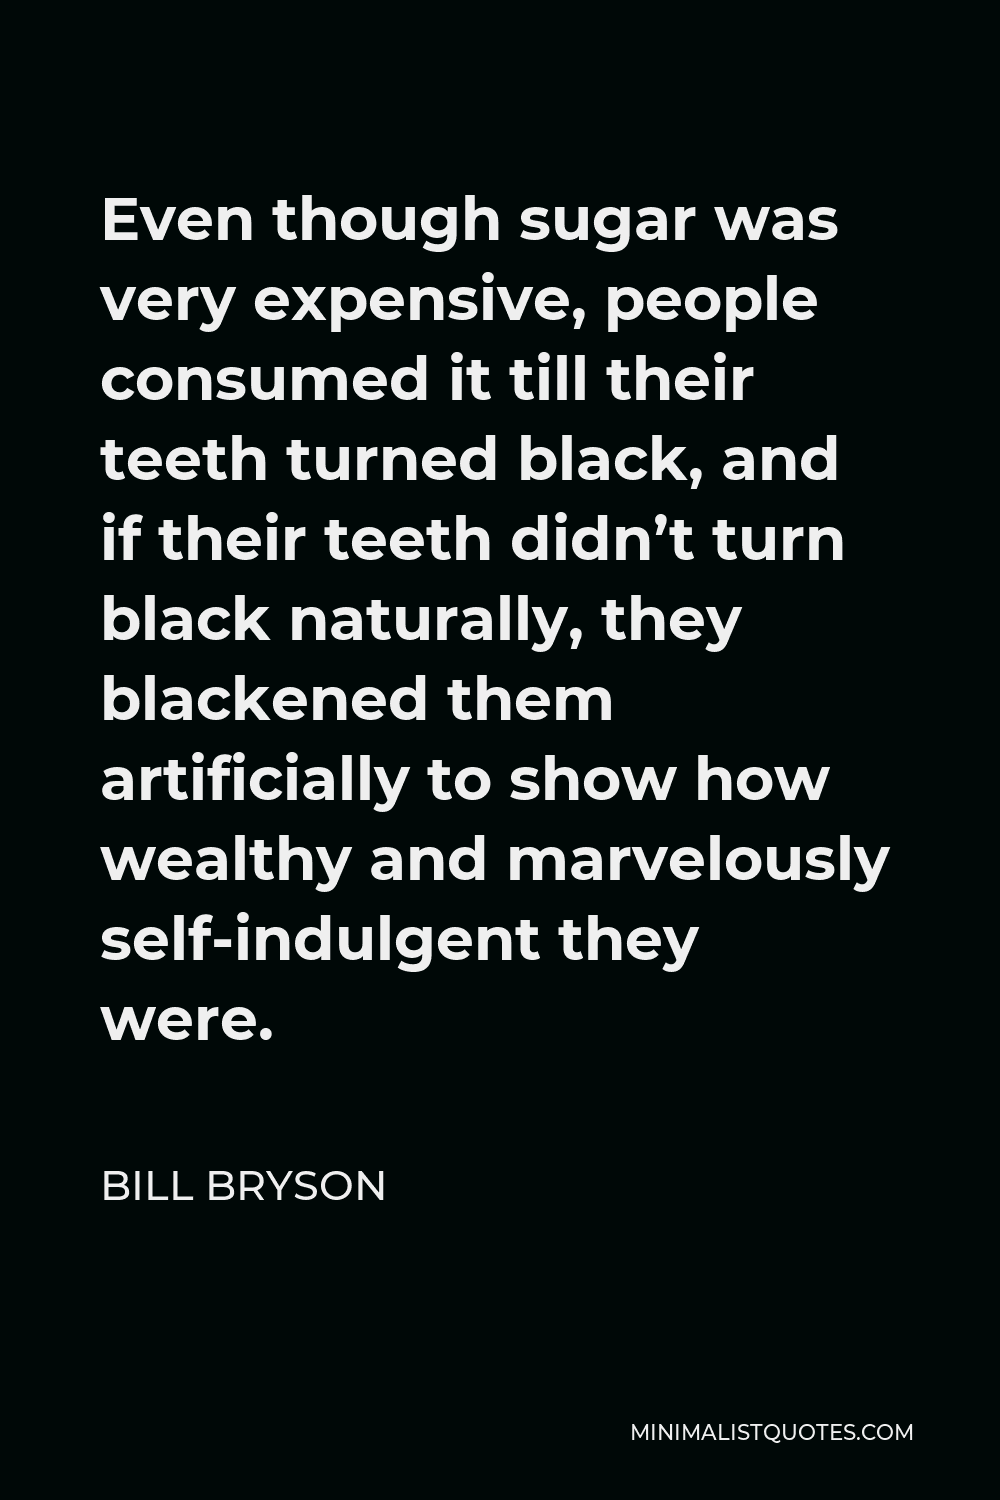 Bill Bryson Quote - Even though sugar was very expensive, people consumed it till their teeth turned black, and if their teeth didn’t turn black naturally, they blackened them artificially to show how wealthy and marvelously self-indulgent they were.